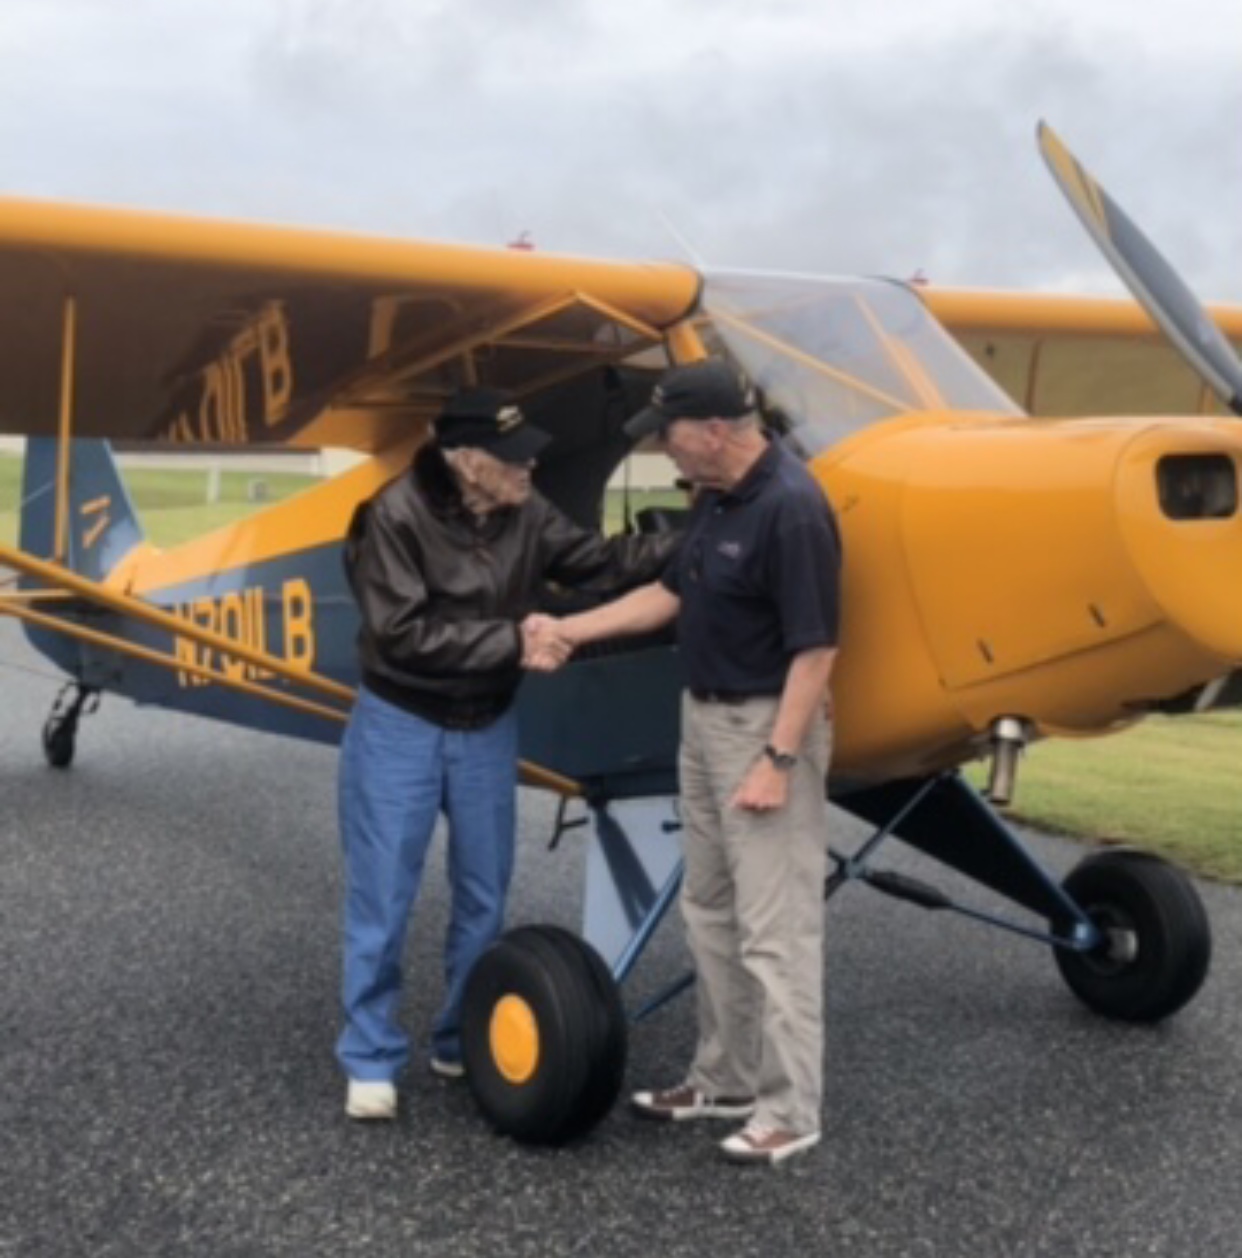 Hank shaking hands with Bobby Blankenship (owner & Pilot) who took Hank for his 100th Birthday flight and 3 landings at Love’s Landing Aviation Community